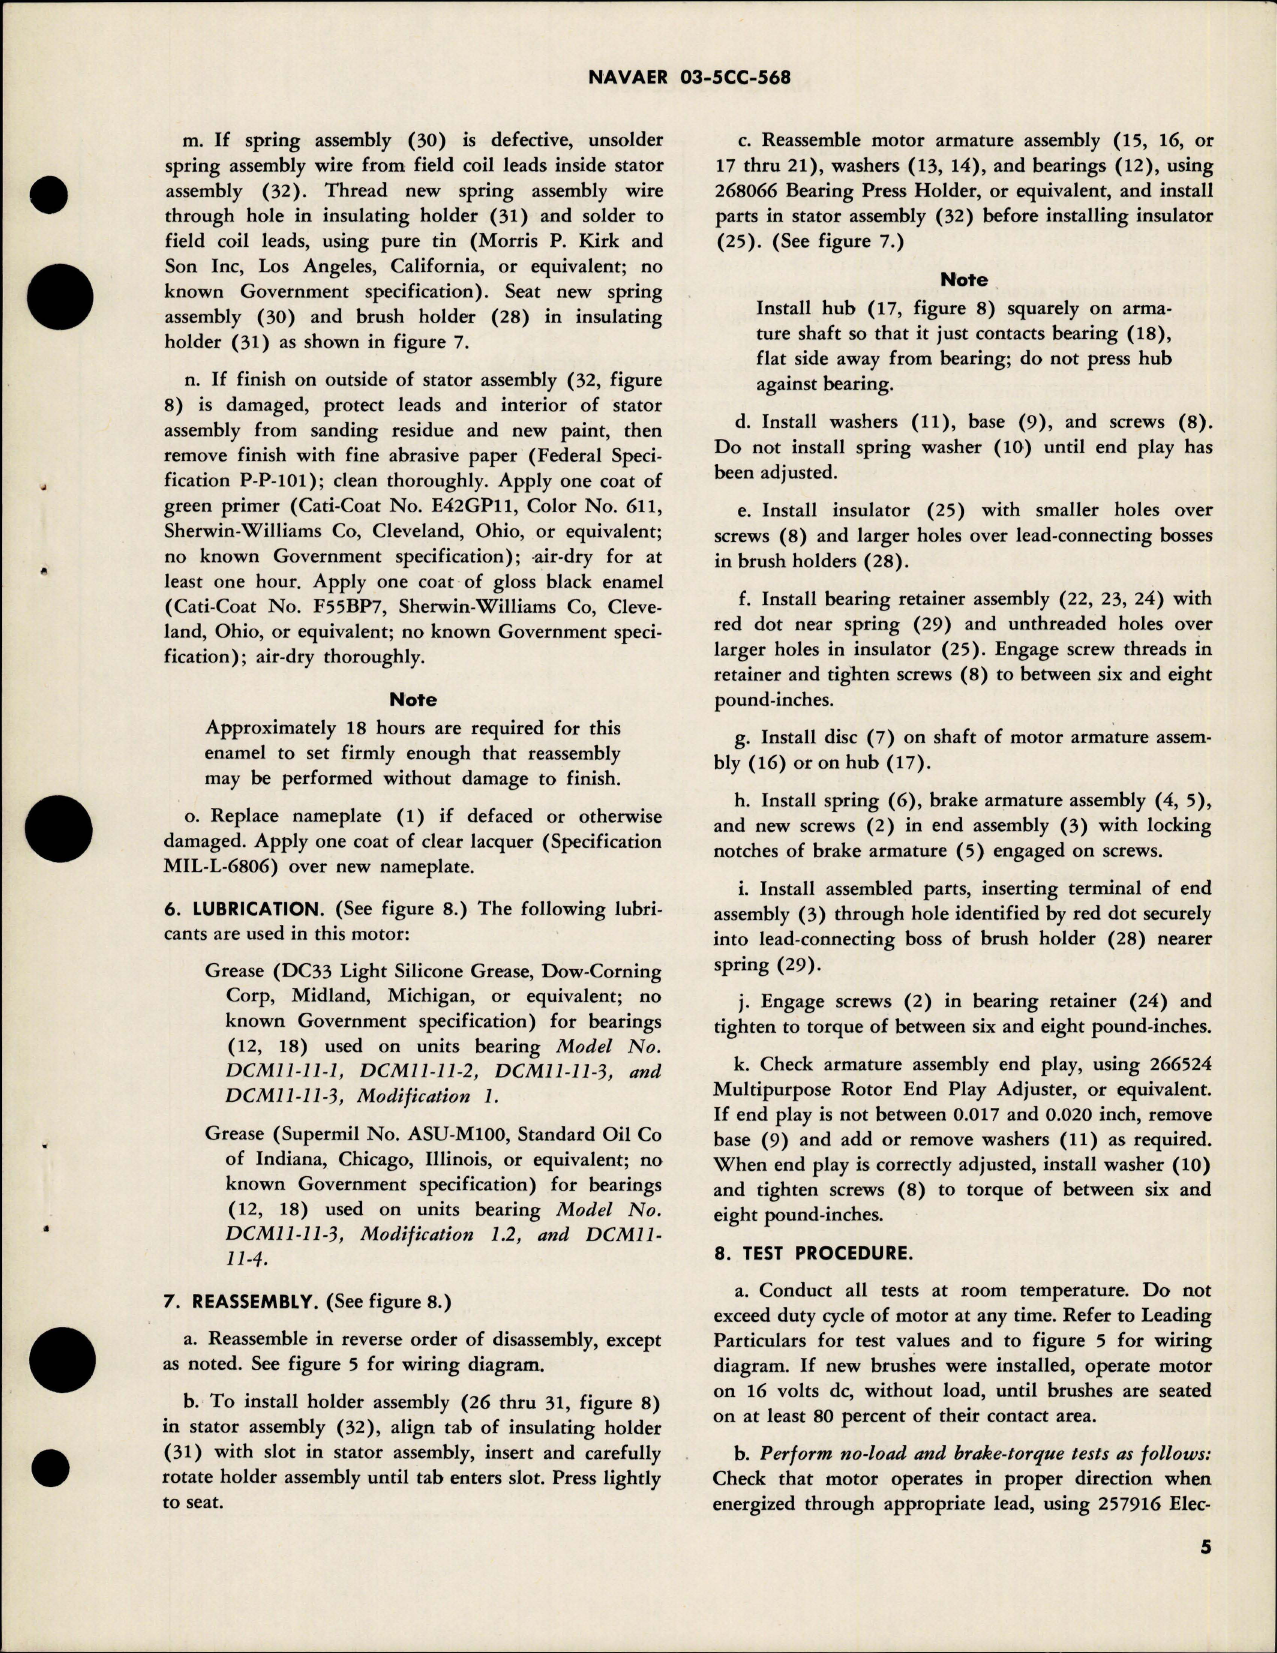 Sample page 5 from AirCorps Library document: Overhaul Instructions with Parts for Aircraft Direct Current Motor - Part 36848 